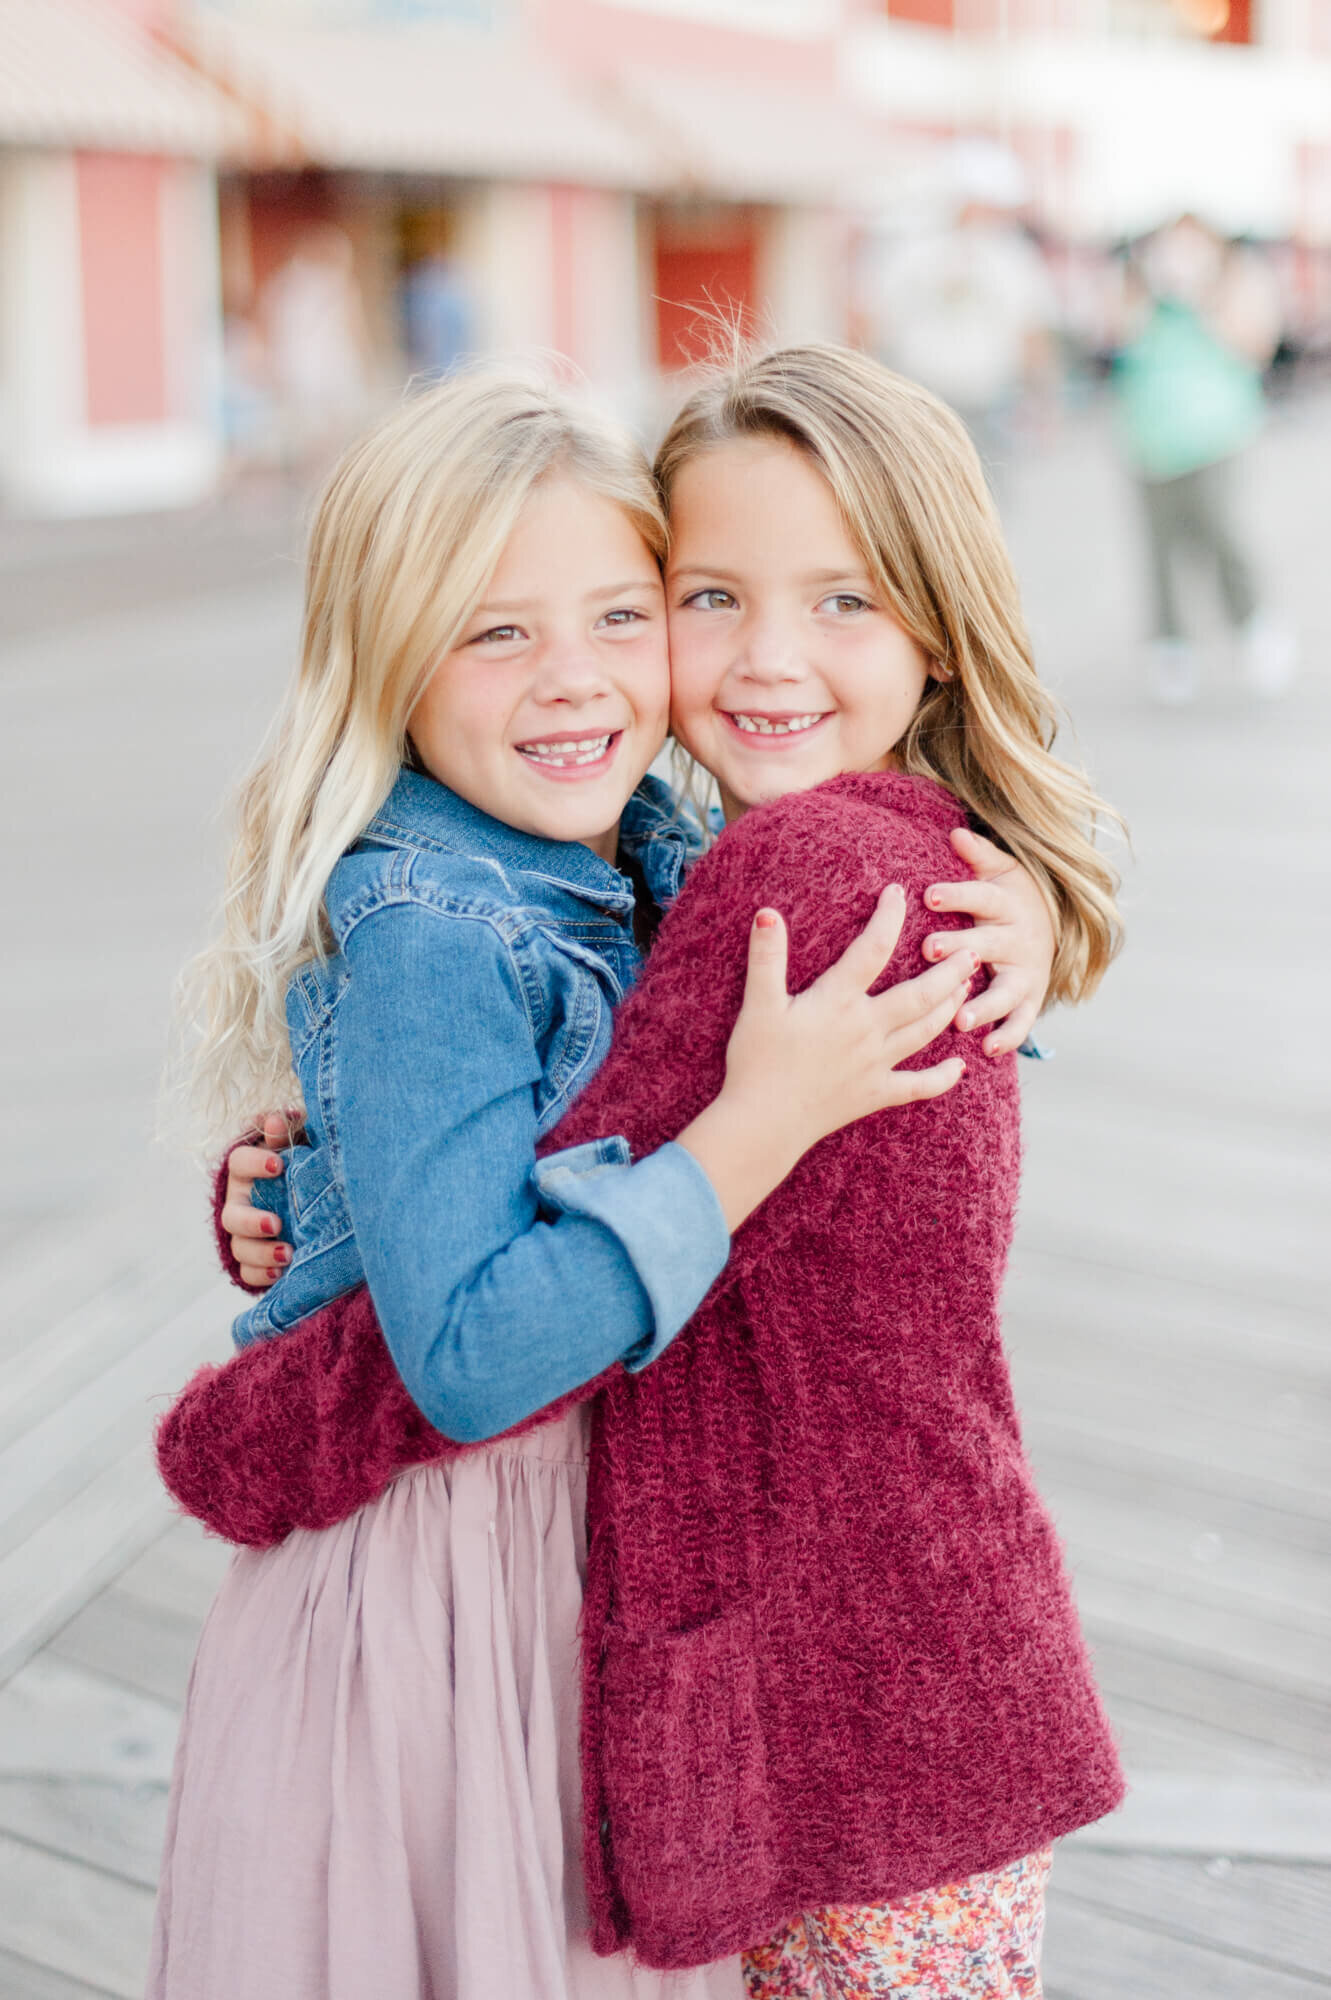 Sweet sisters hugging each other tight on Disney's boardwalk at sunset during their family photography session